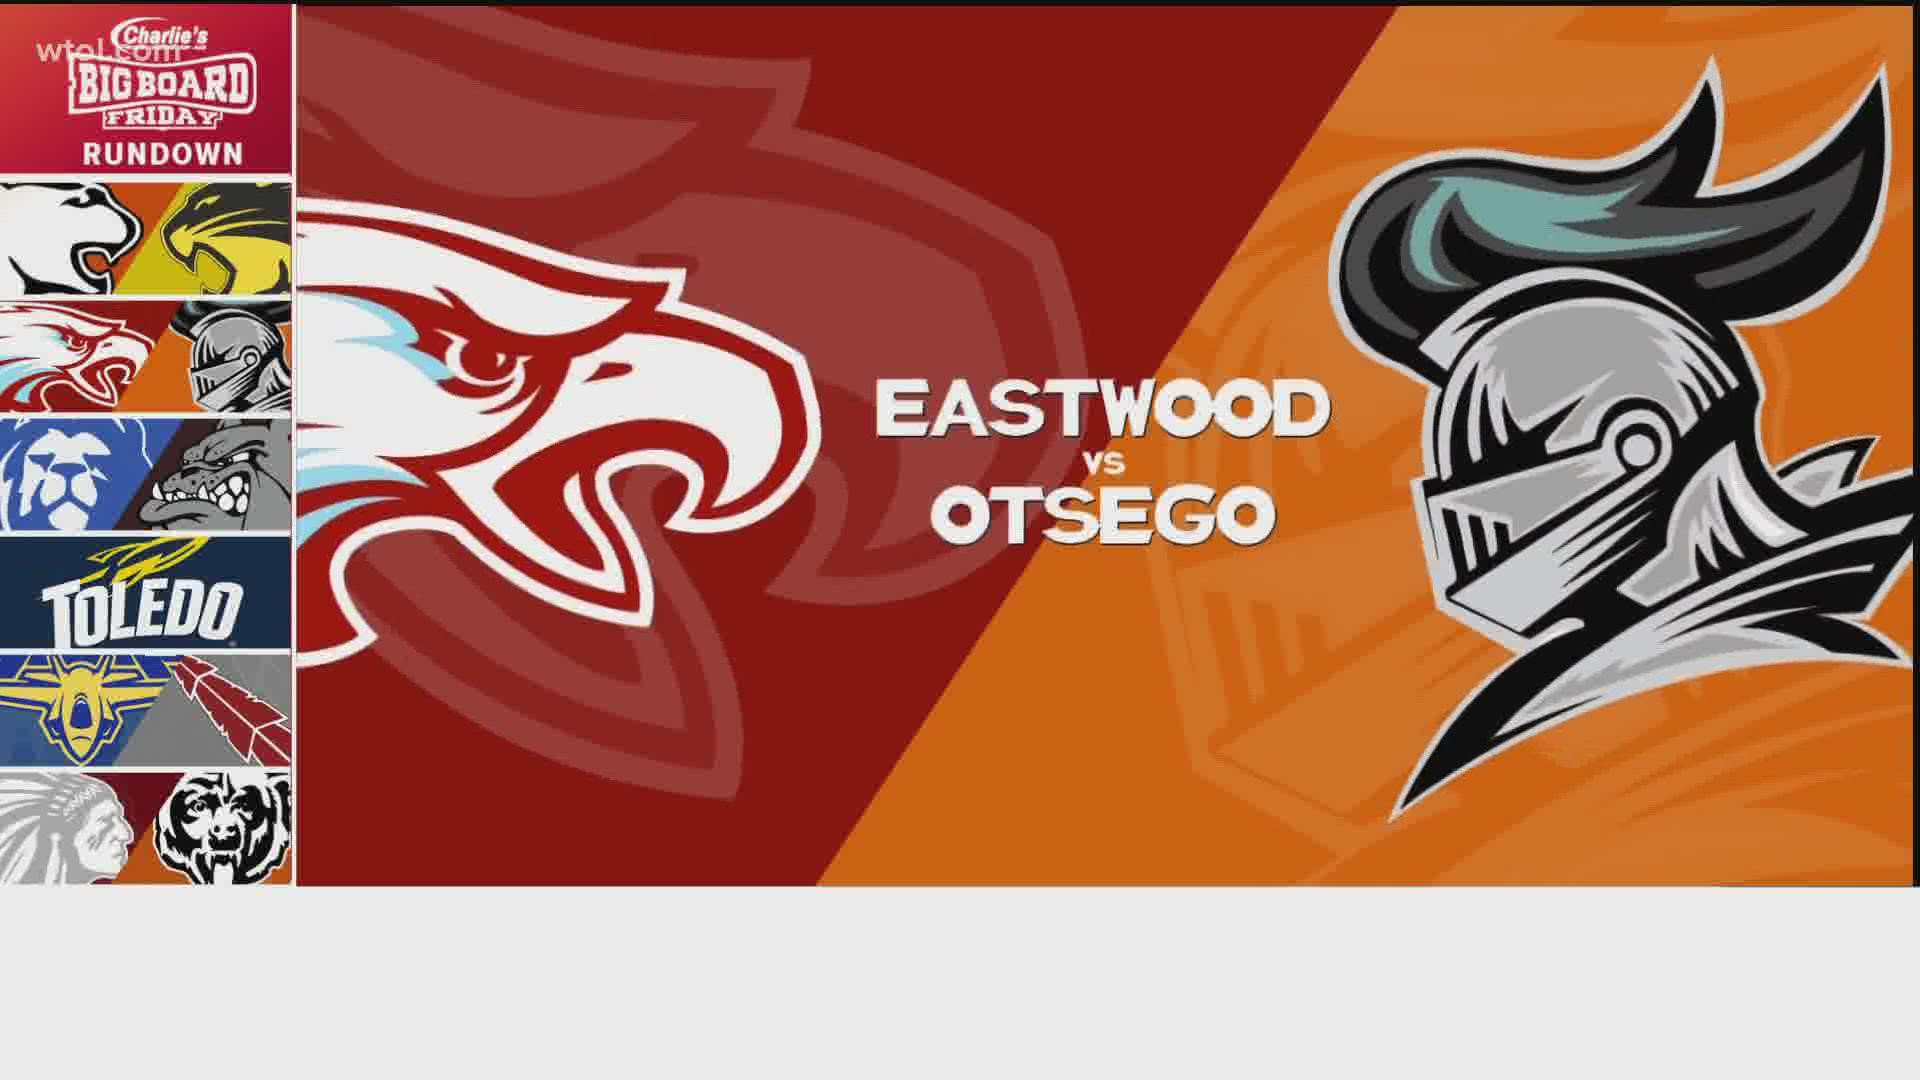 Now to our Game of the Week. NBC title on the line here. Otsego is number 3 in Ohio. A win over Eastwood gives them the Northern Buckeye title outright. Buckle up!